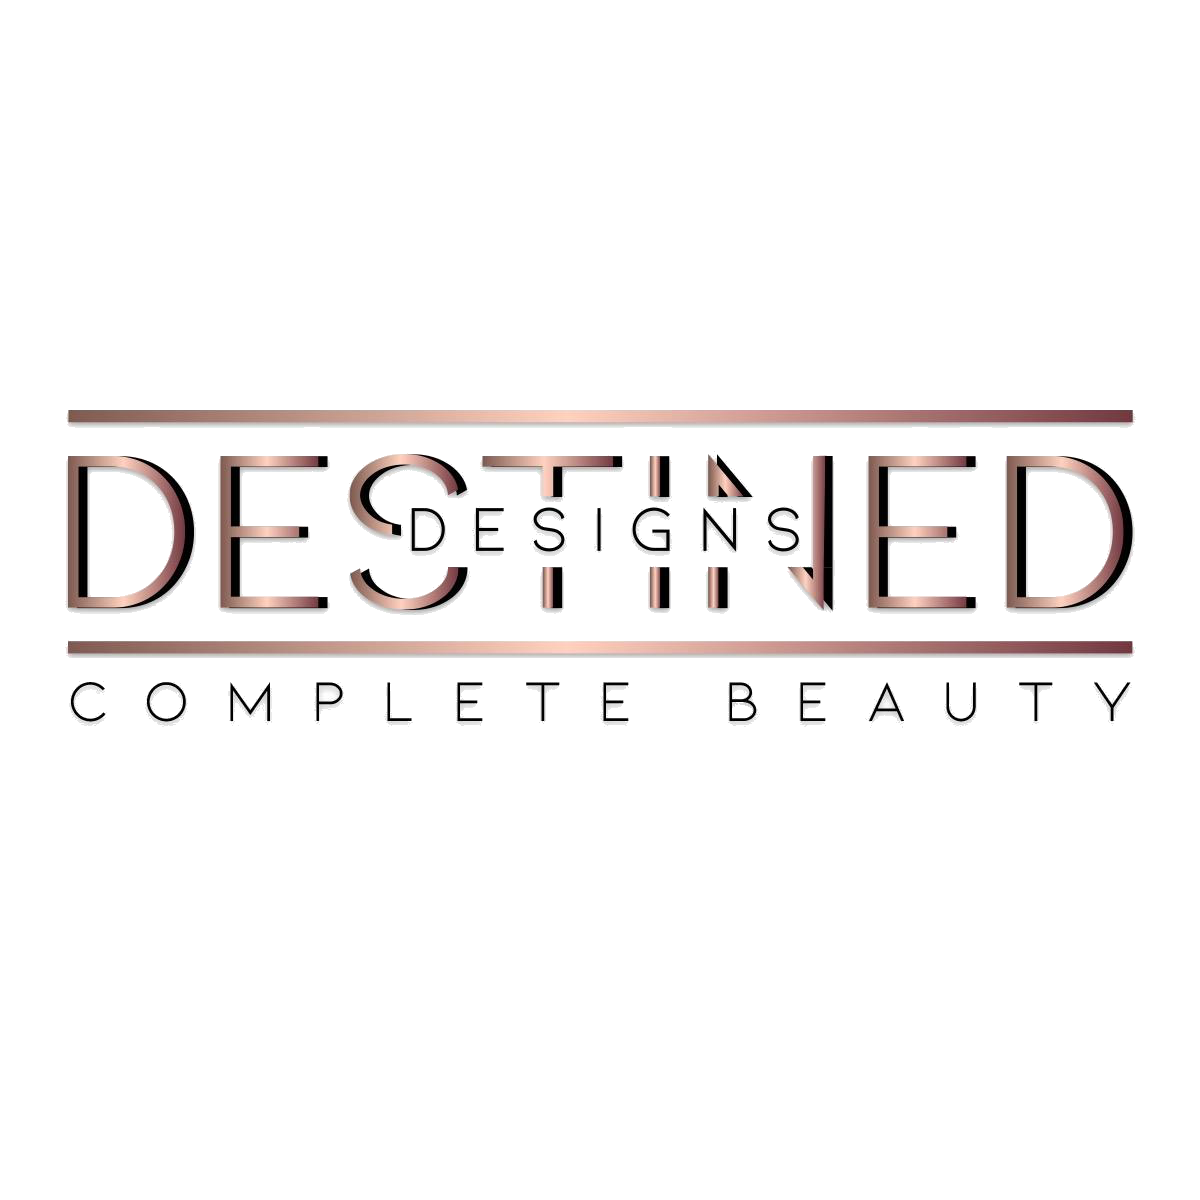 Destined Designs Complete Beauty